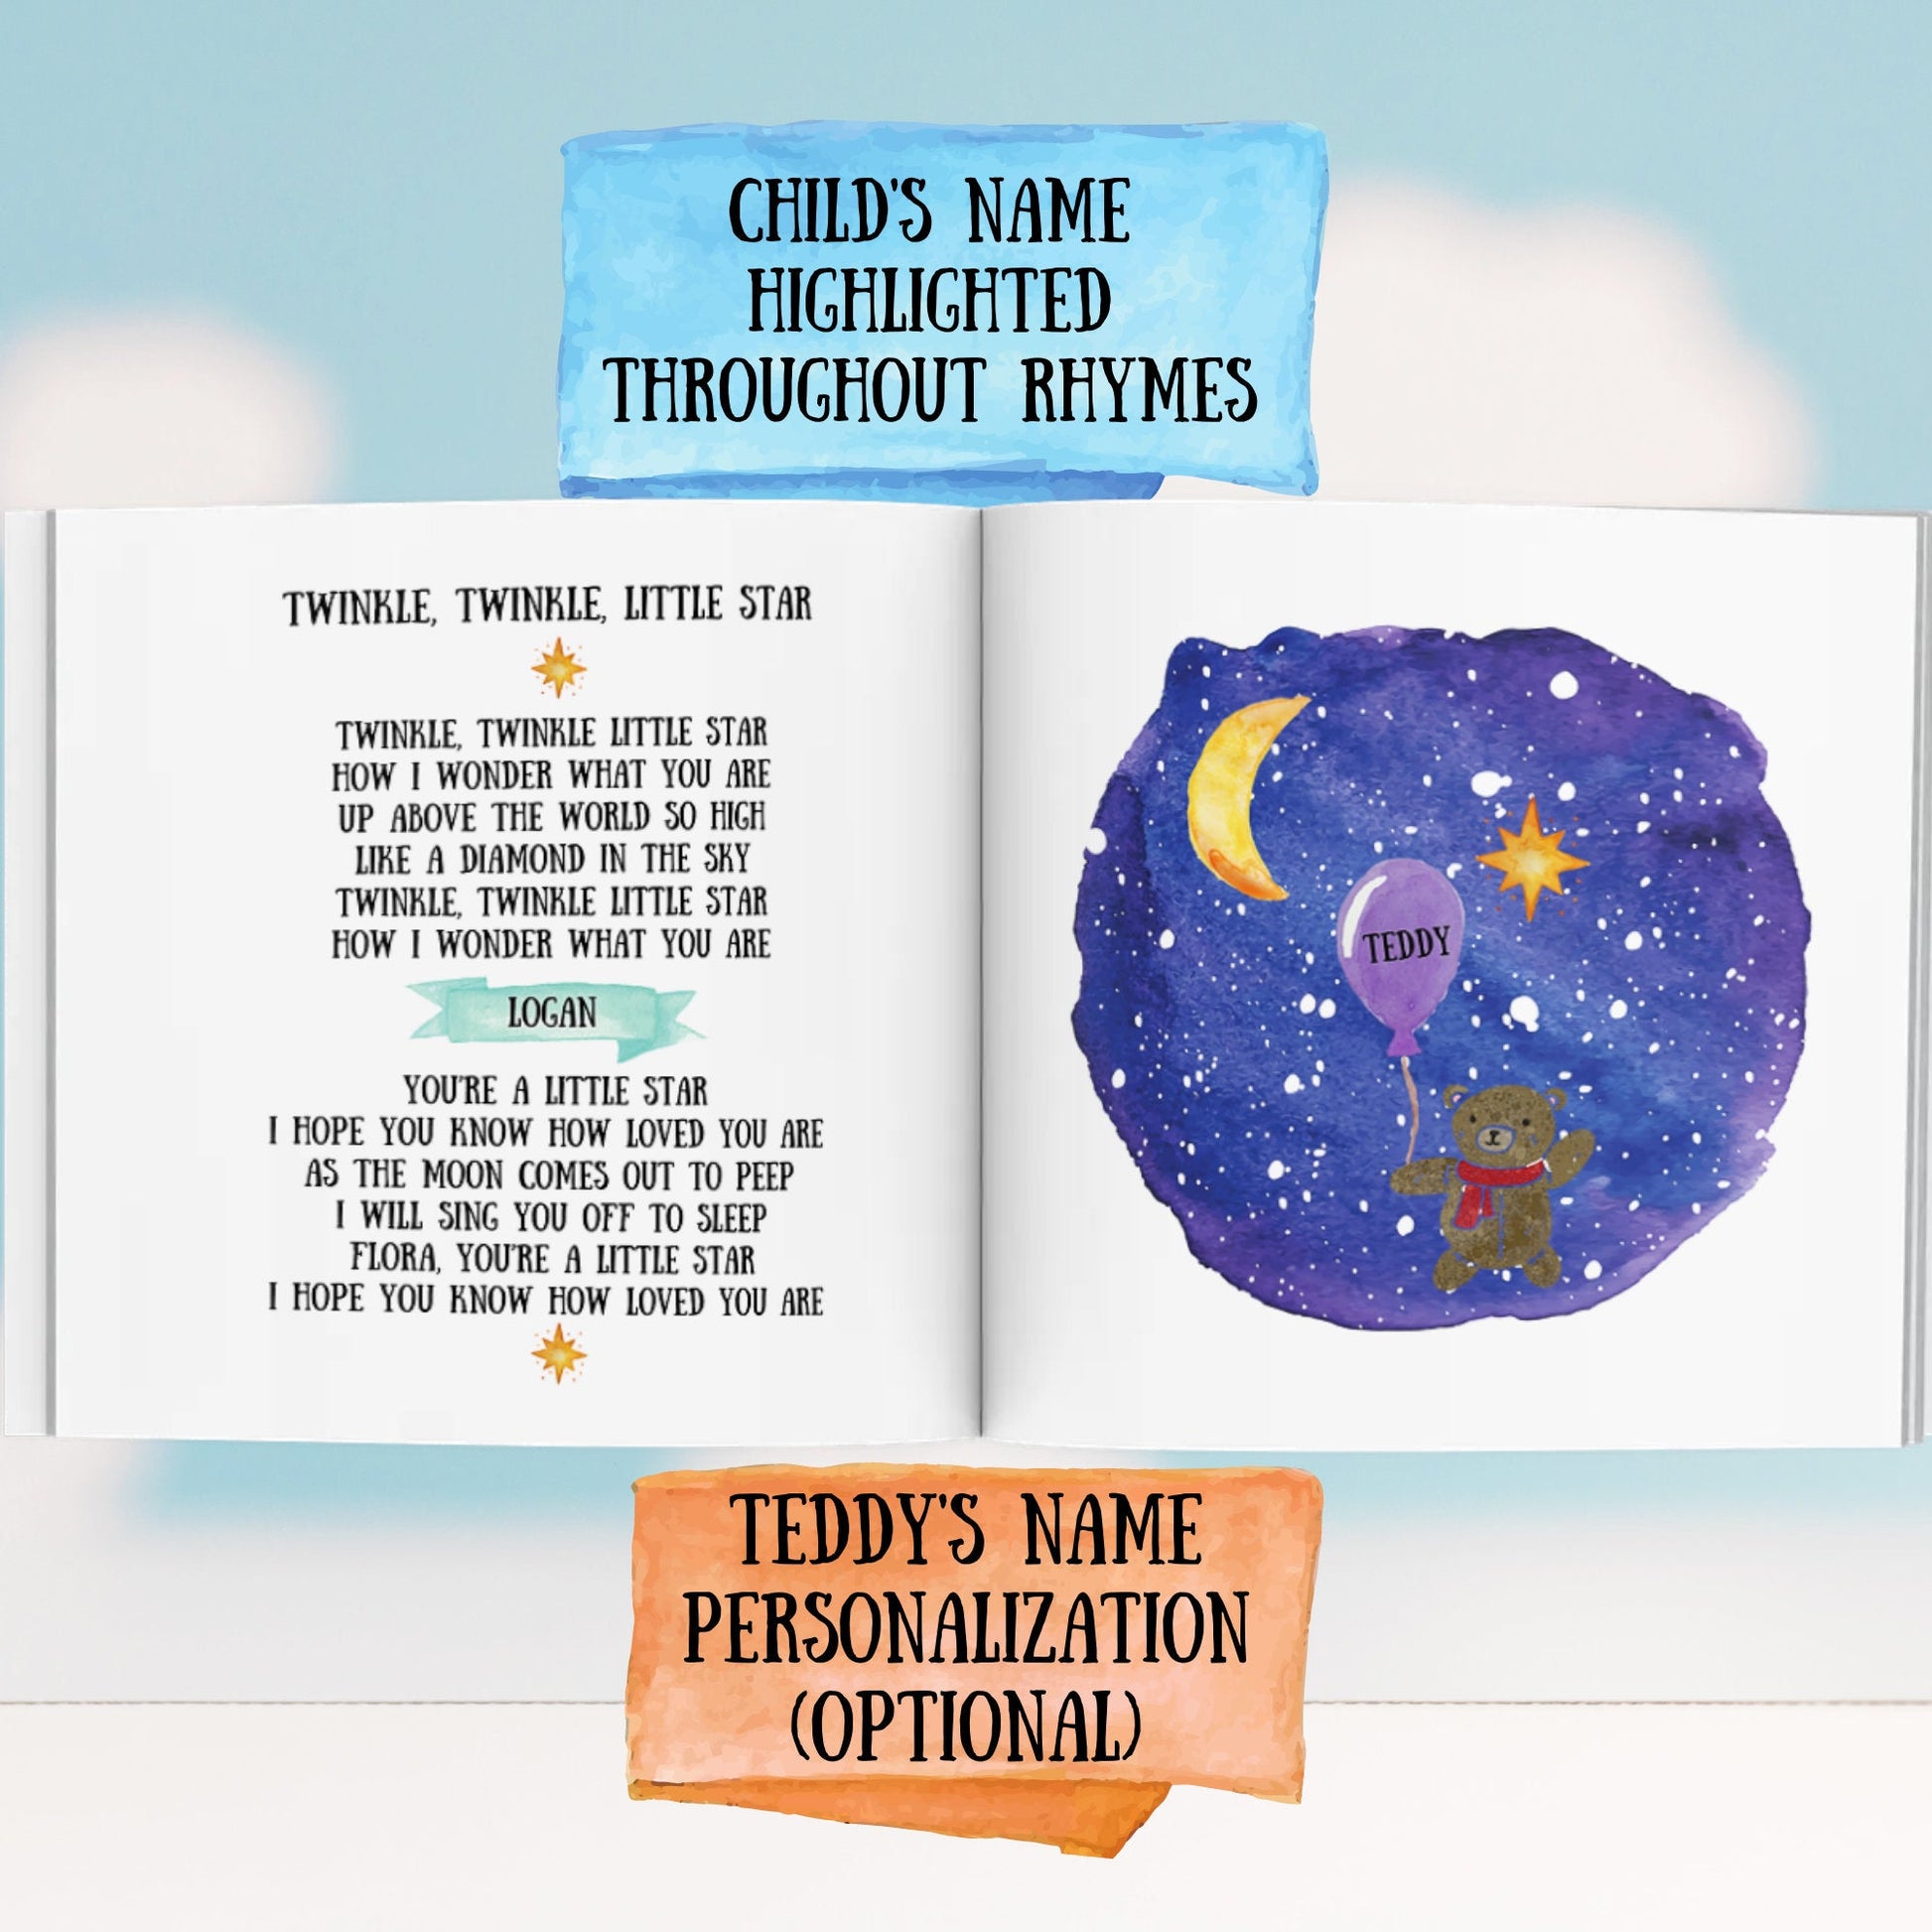 Bedtime Rhymes Personalized Children’s Book - Custom Baby Book of Nursery Rhymes w/child’s name, great baby gift or toddler gift